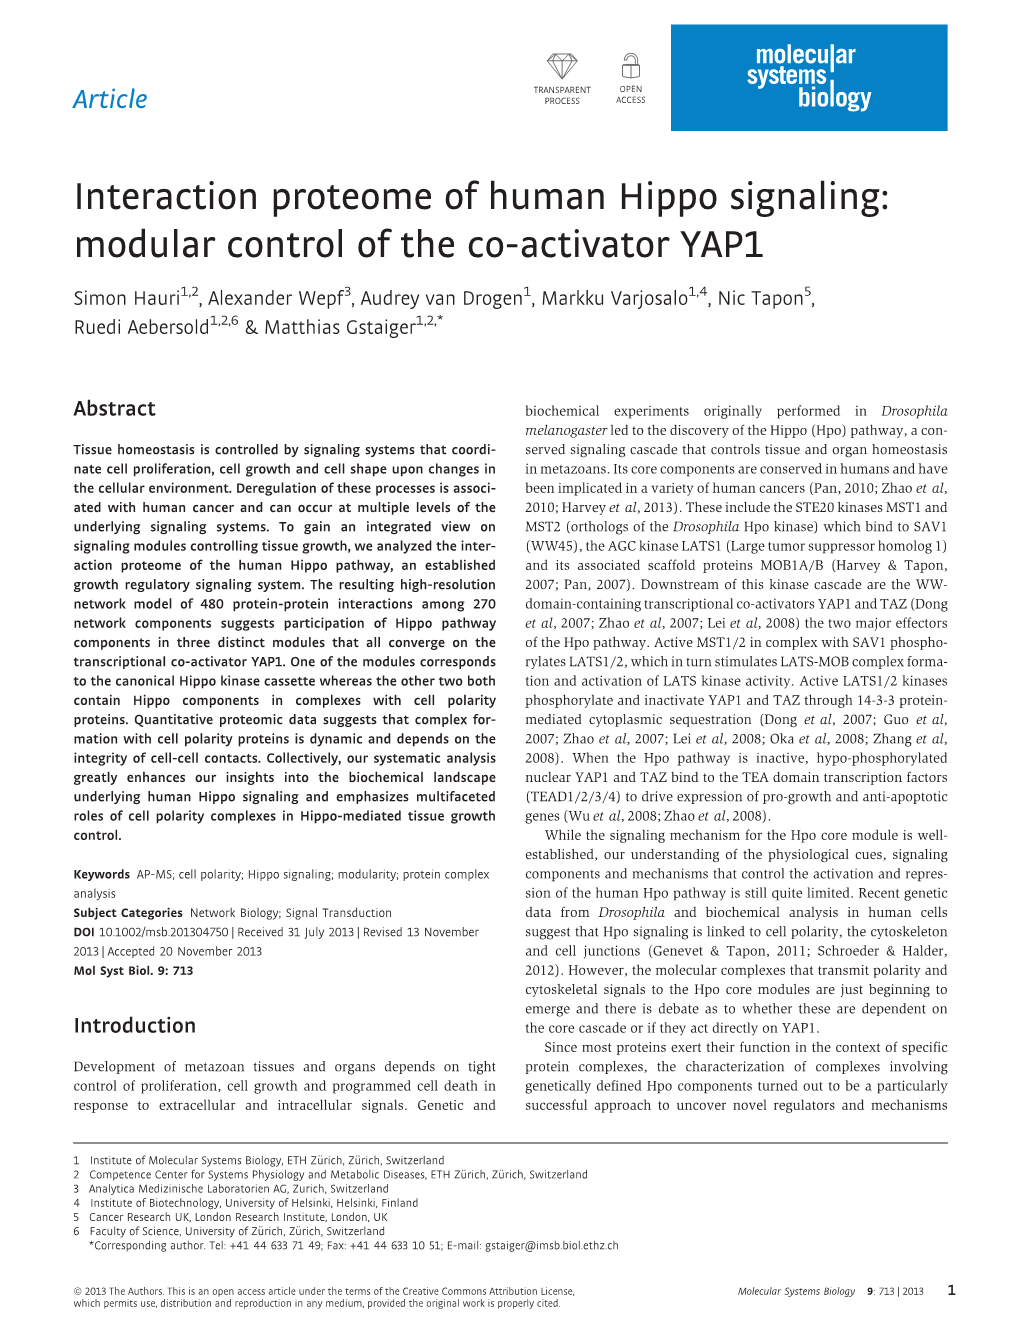 Interaction Proteome of Human Hippo Signaling: Modular Control of the Co-Activator YAP1